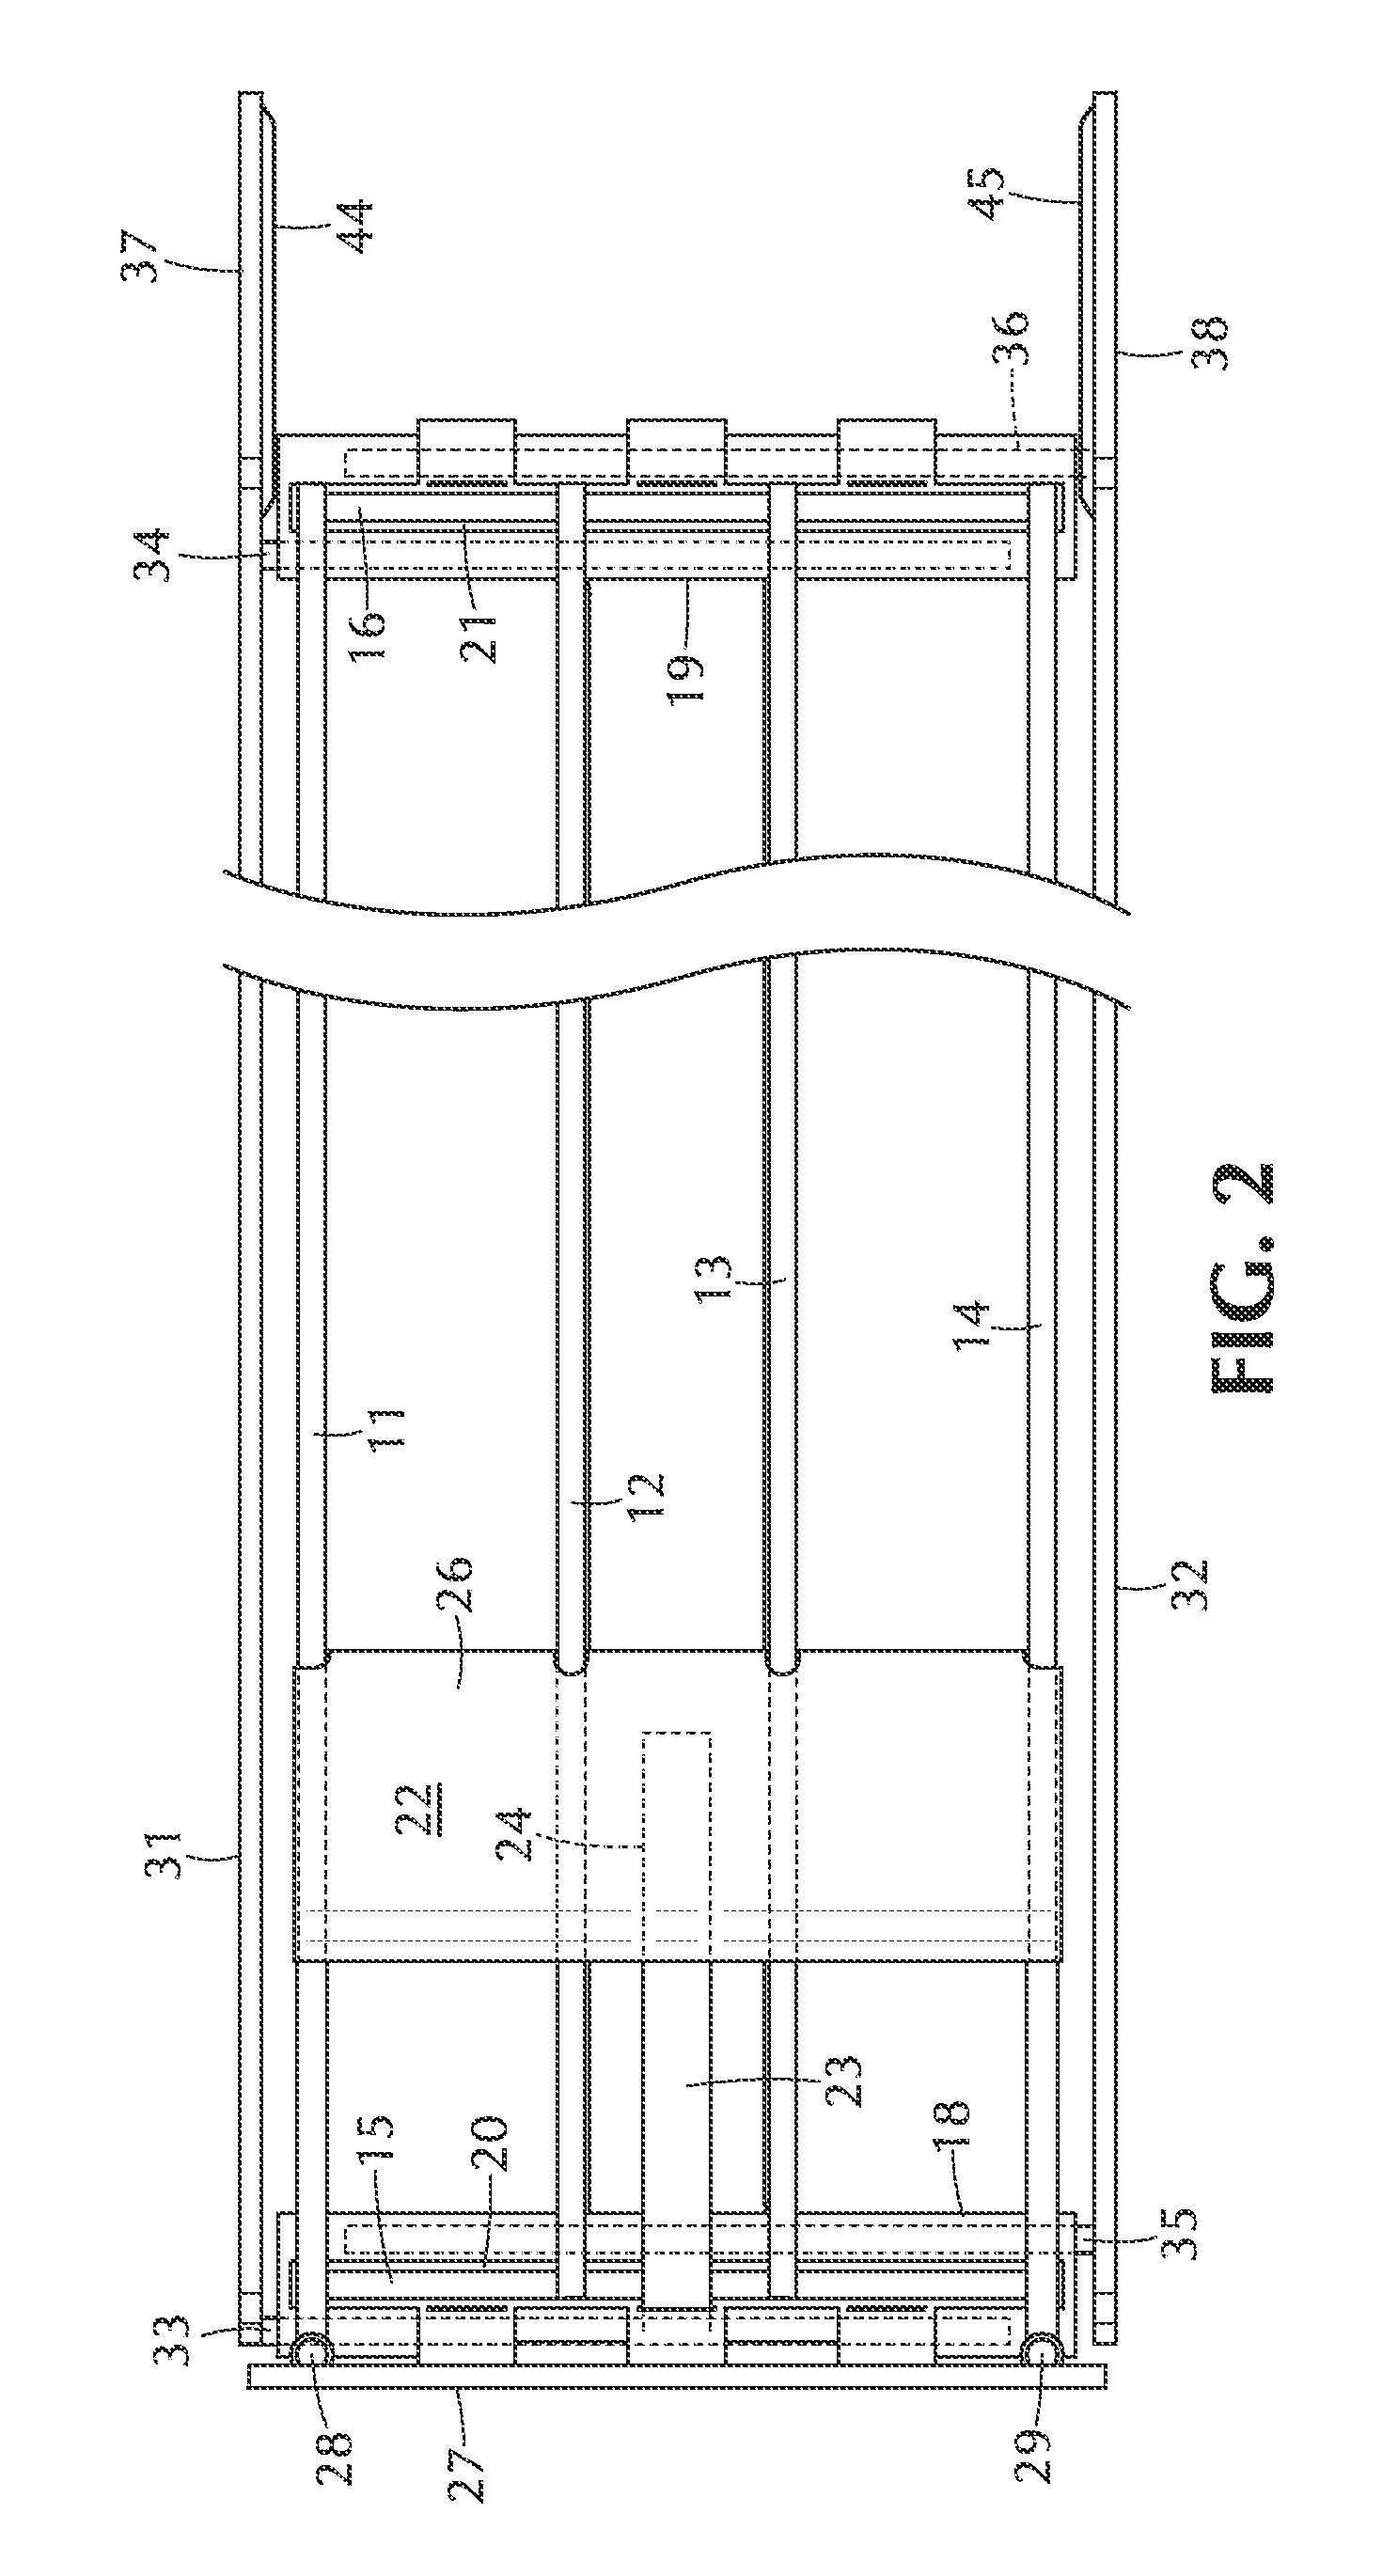 Width-adjustable product display tray with novel mounting arrangement